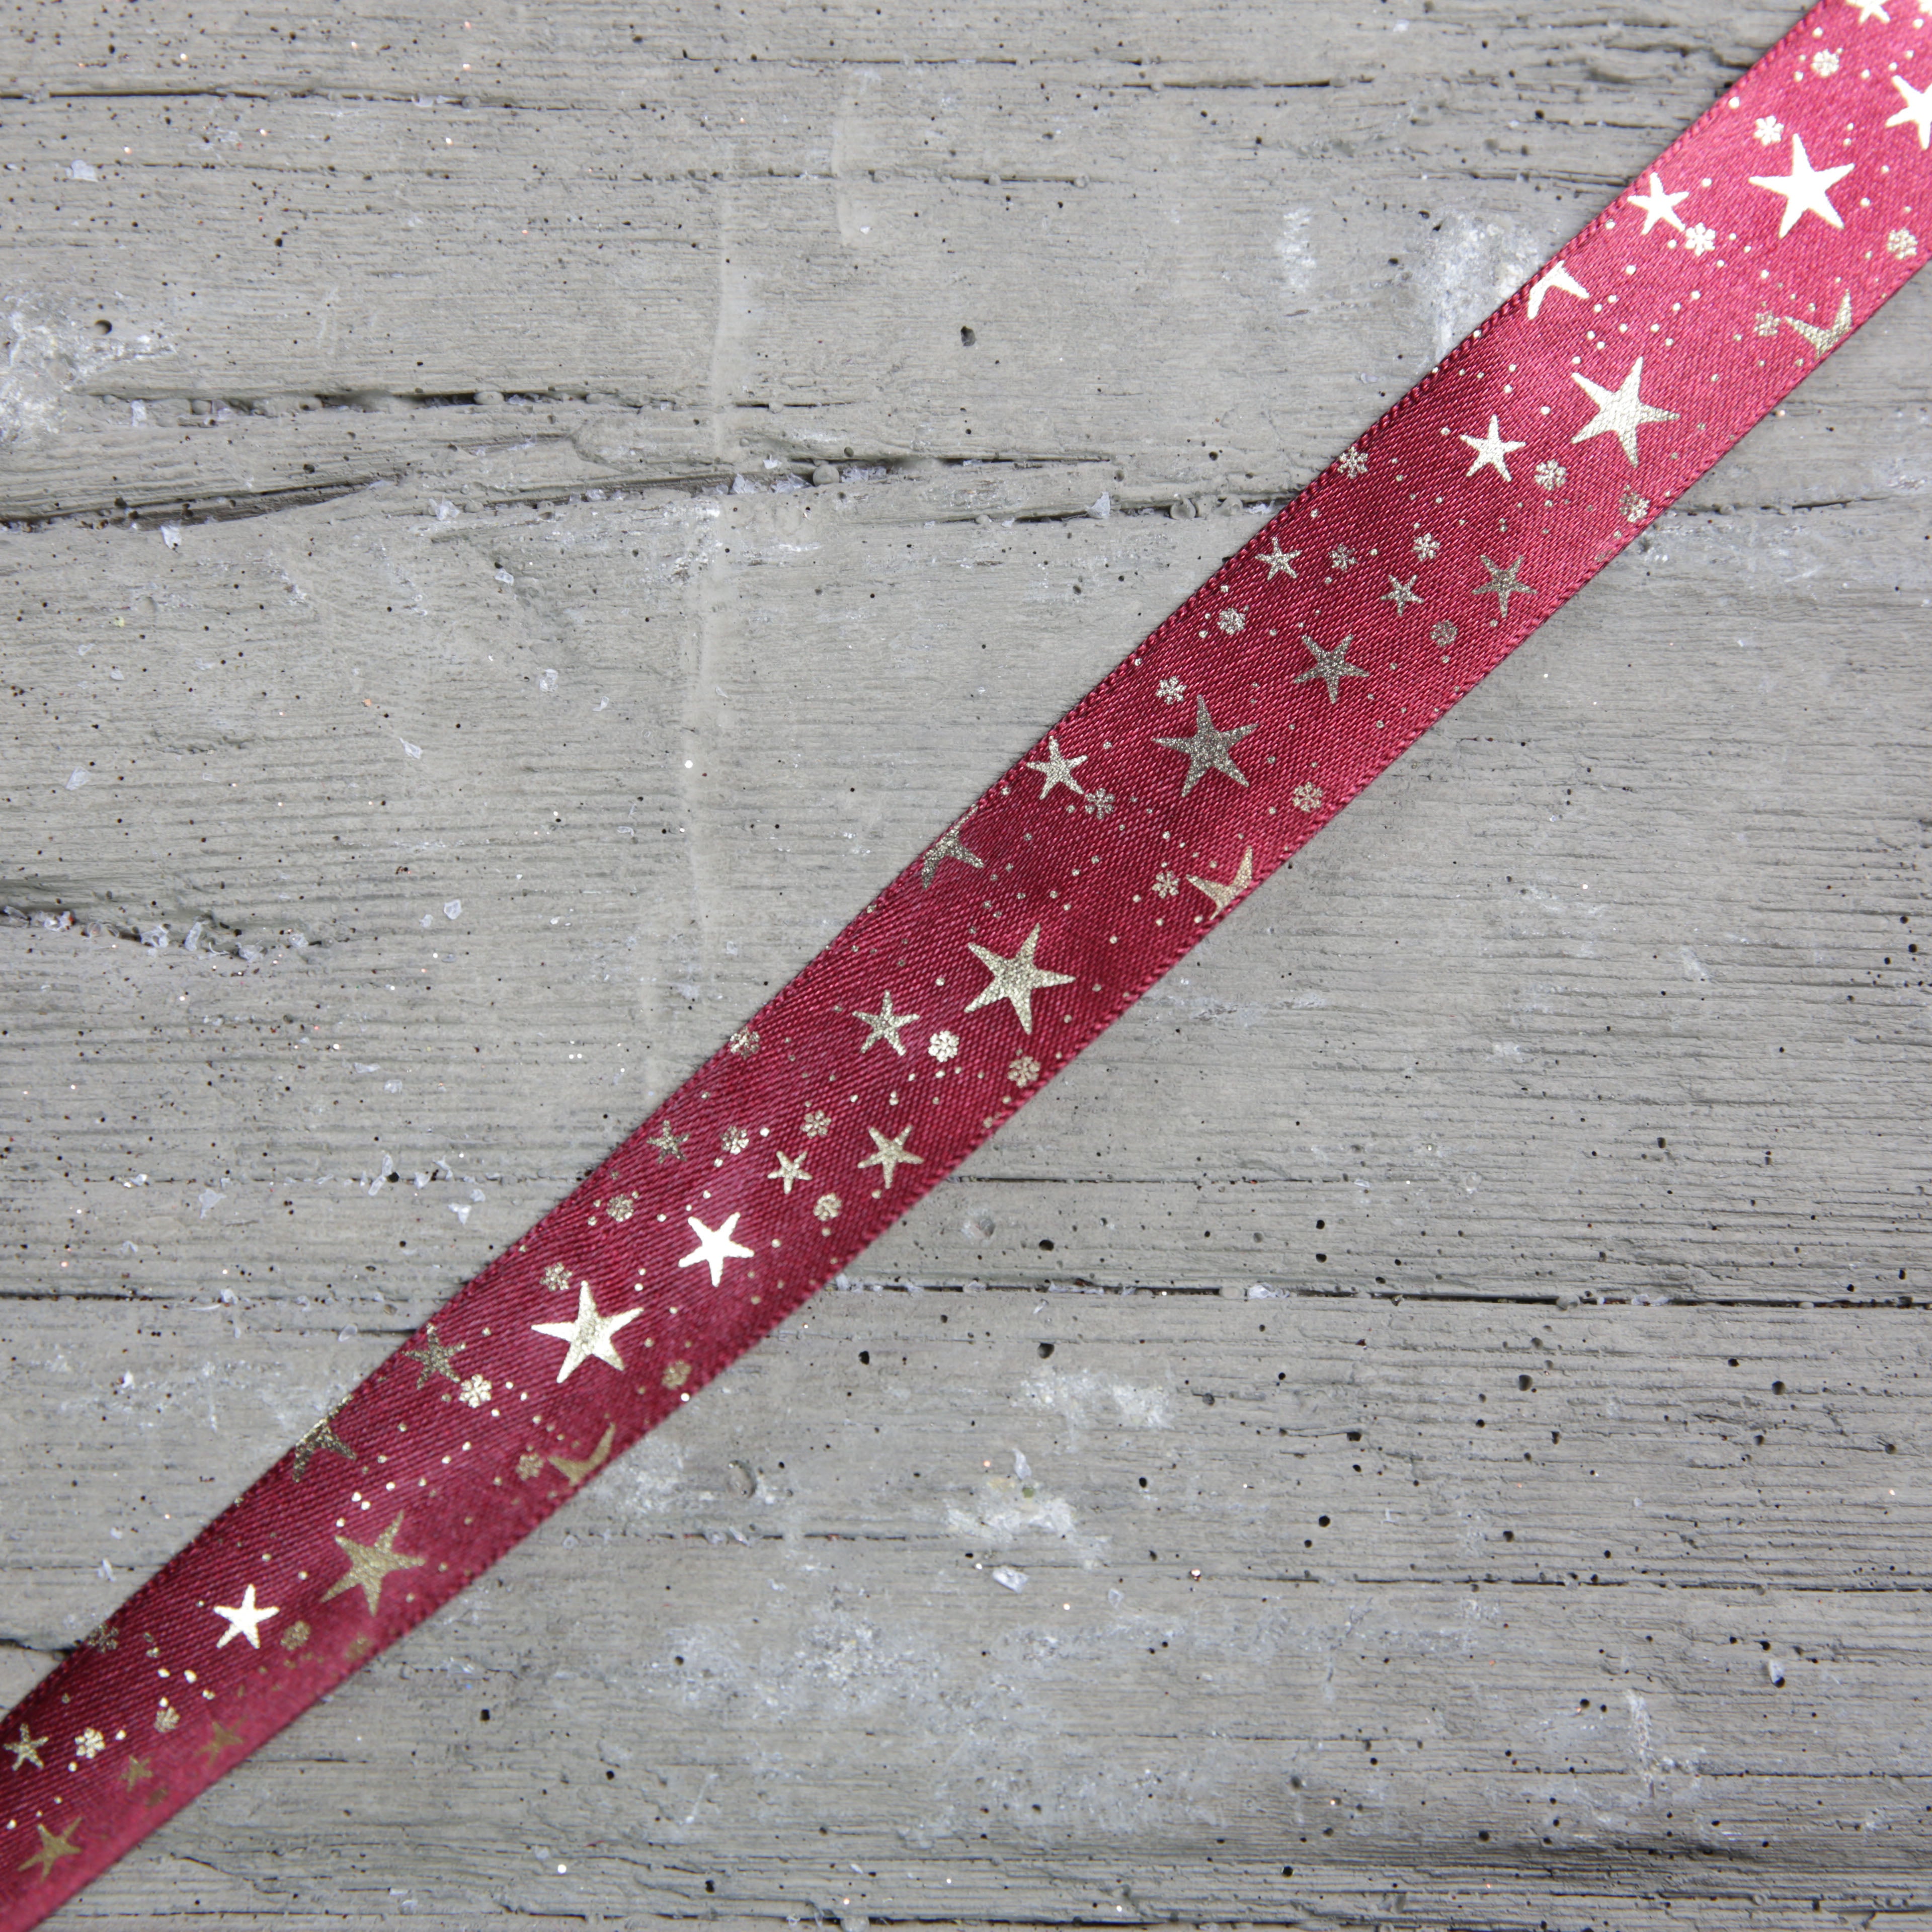 Christmas Print Rustic Ribbon 2.5m Deep Red & Gold Foil - 2 Designs Available